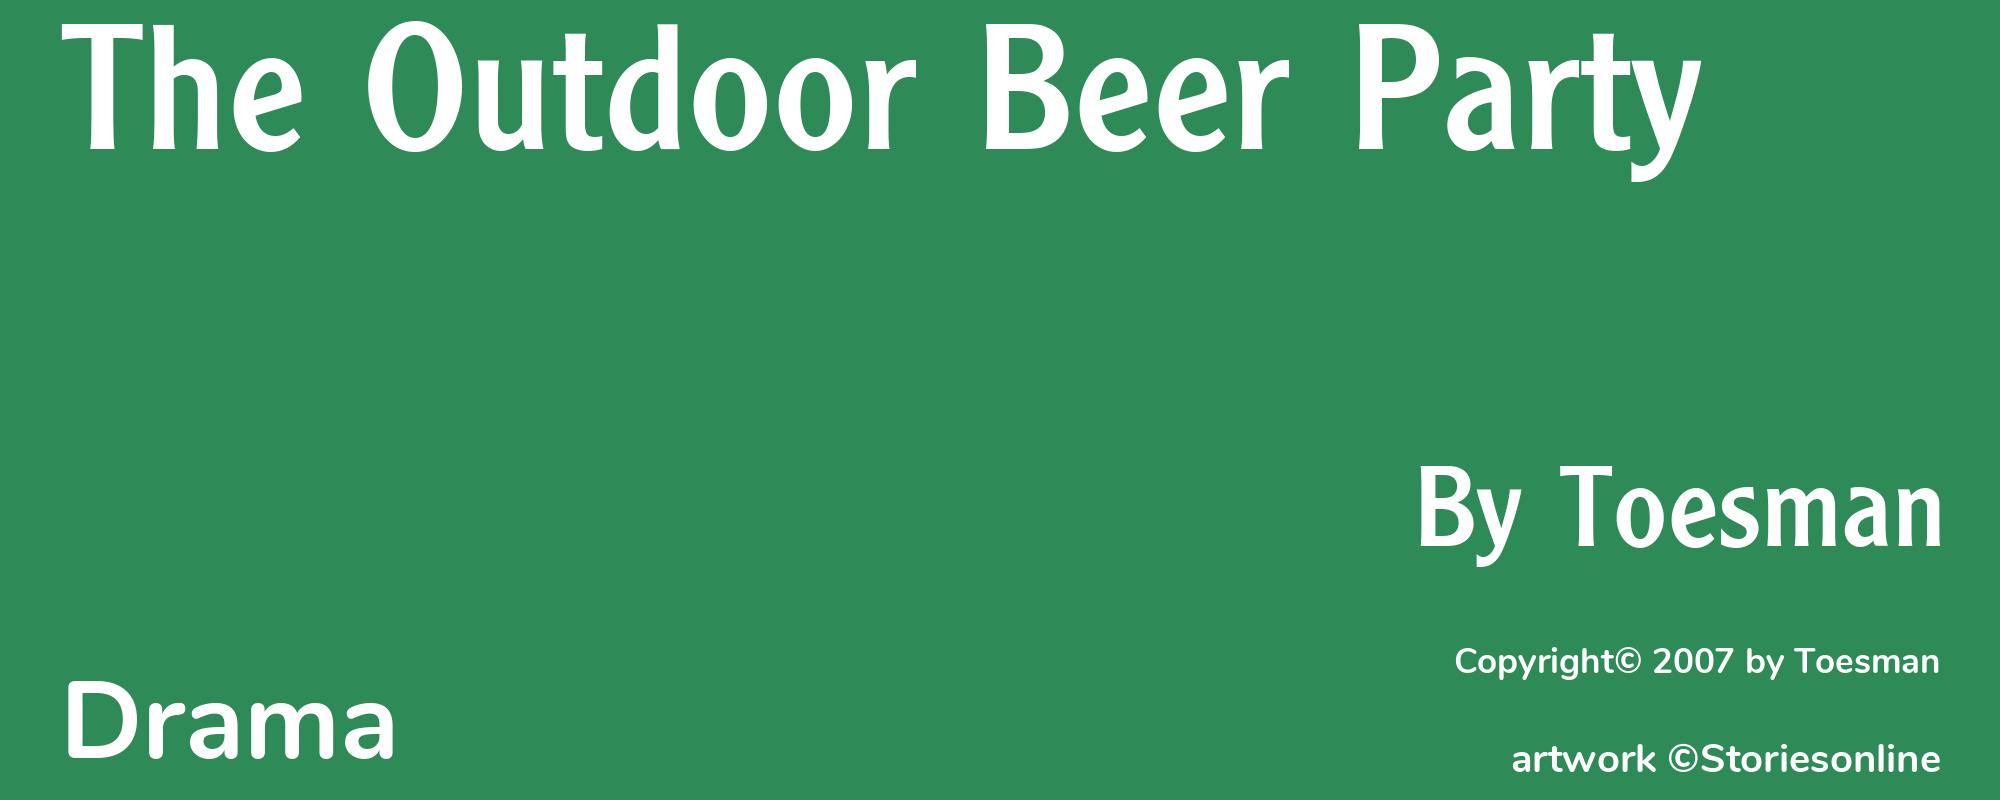 The Outdoor Beer Party - Cover